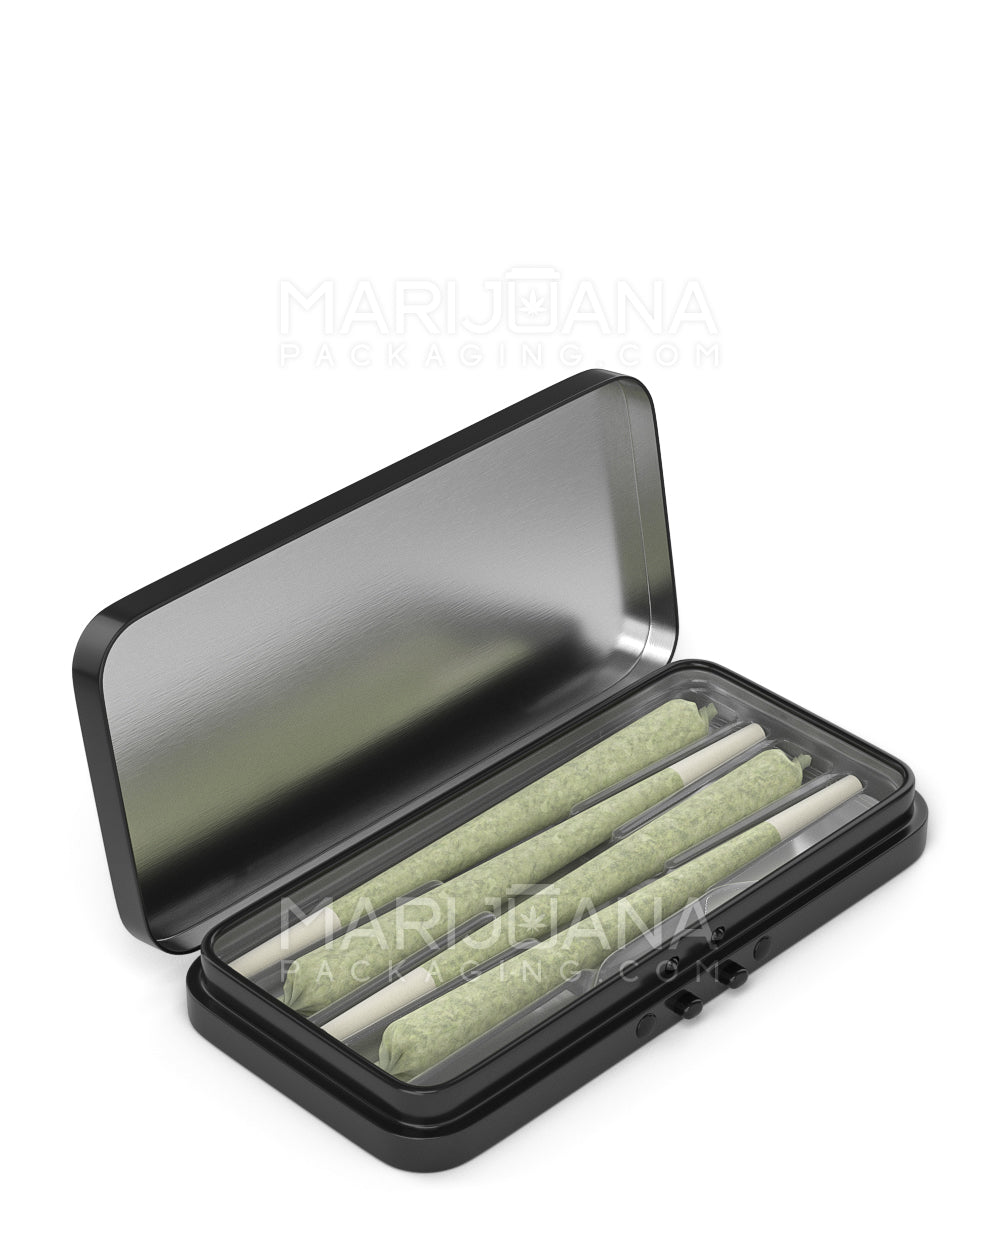 Edible & Joint Box Insert Tray for 4 King Size Pre Rolled Cones | 109mm - Clear Plastic - 100 Count - 8